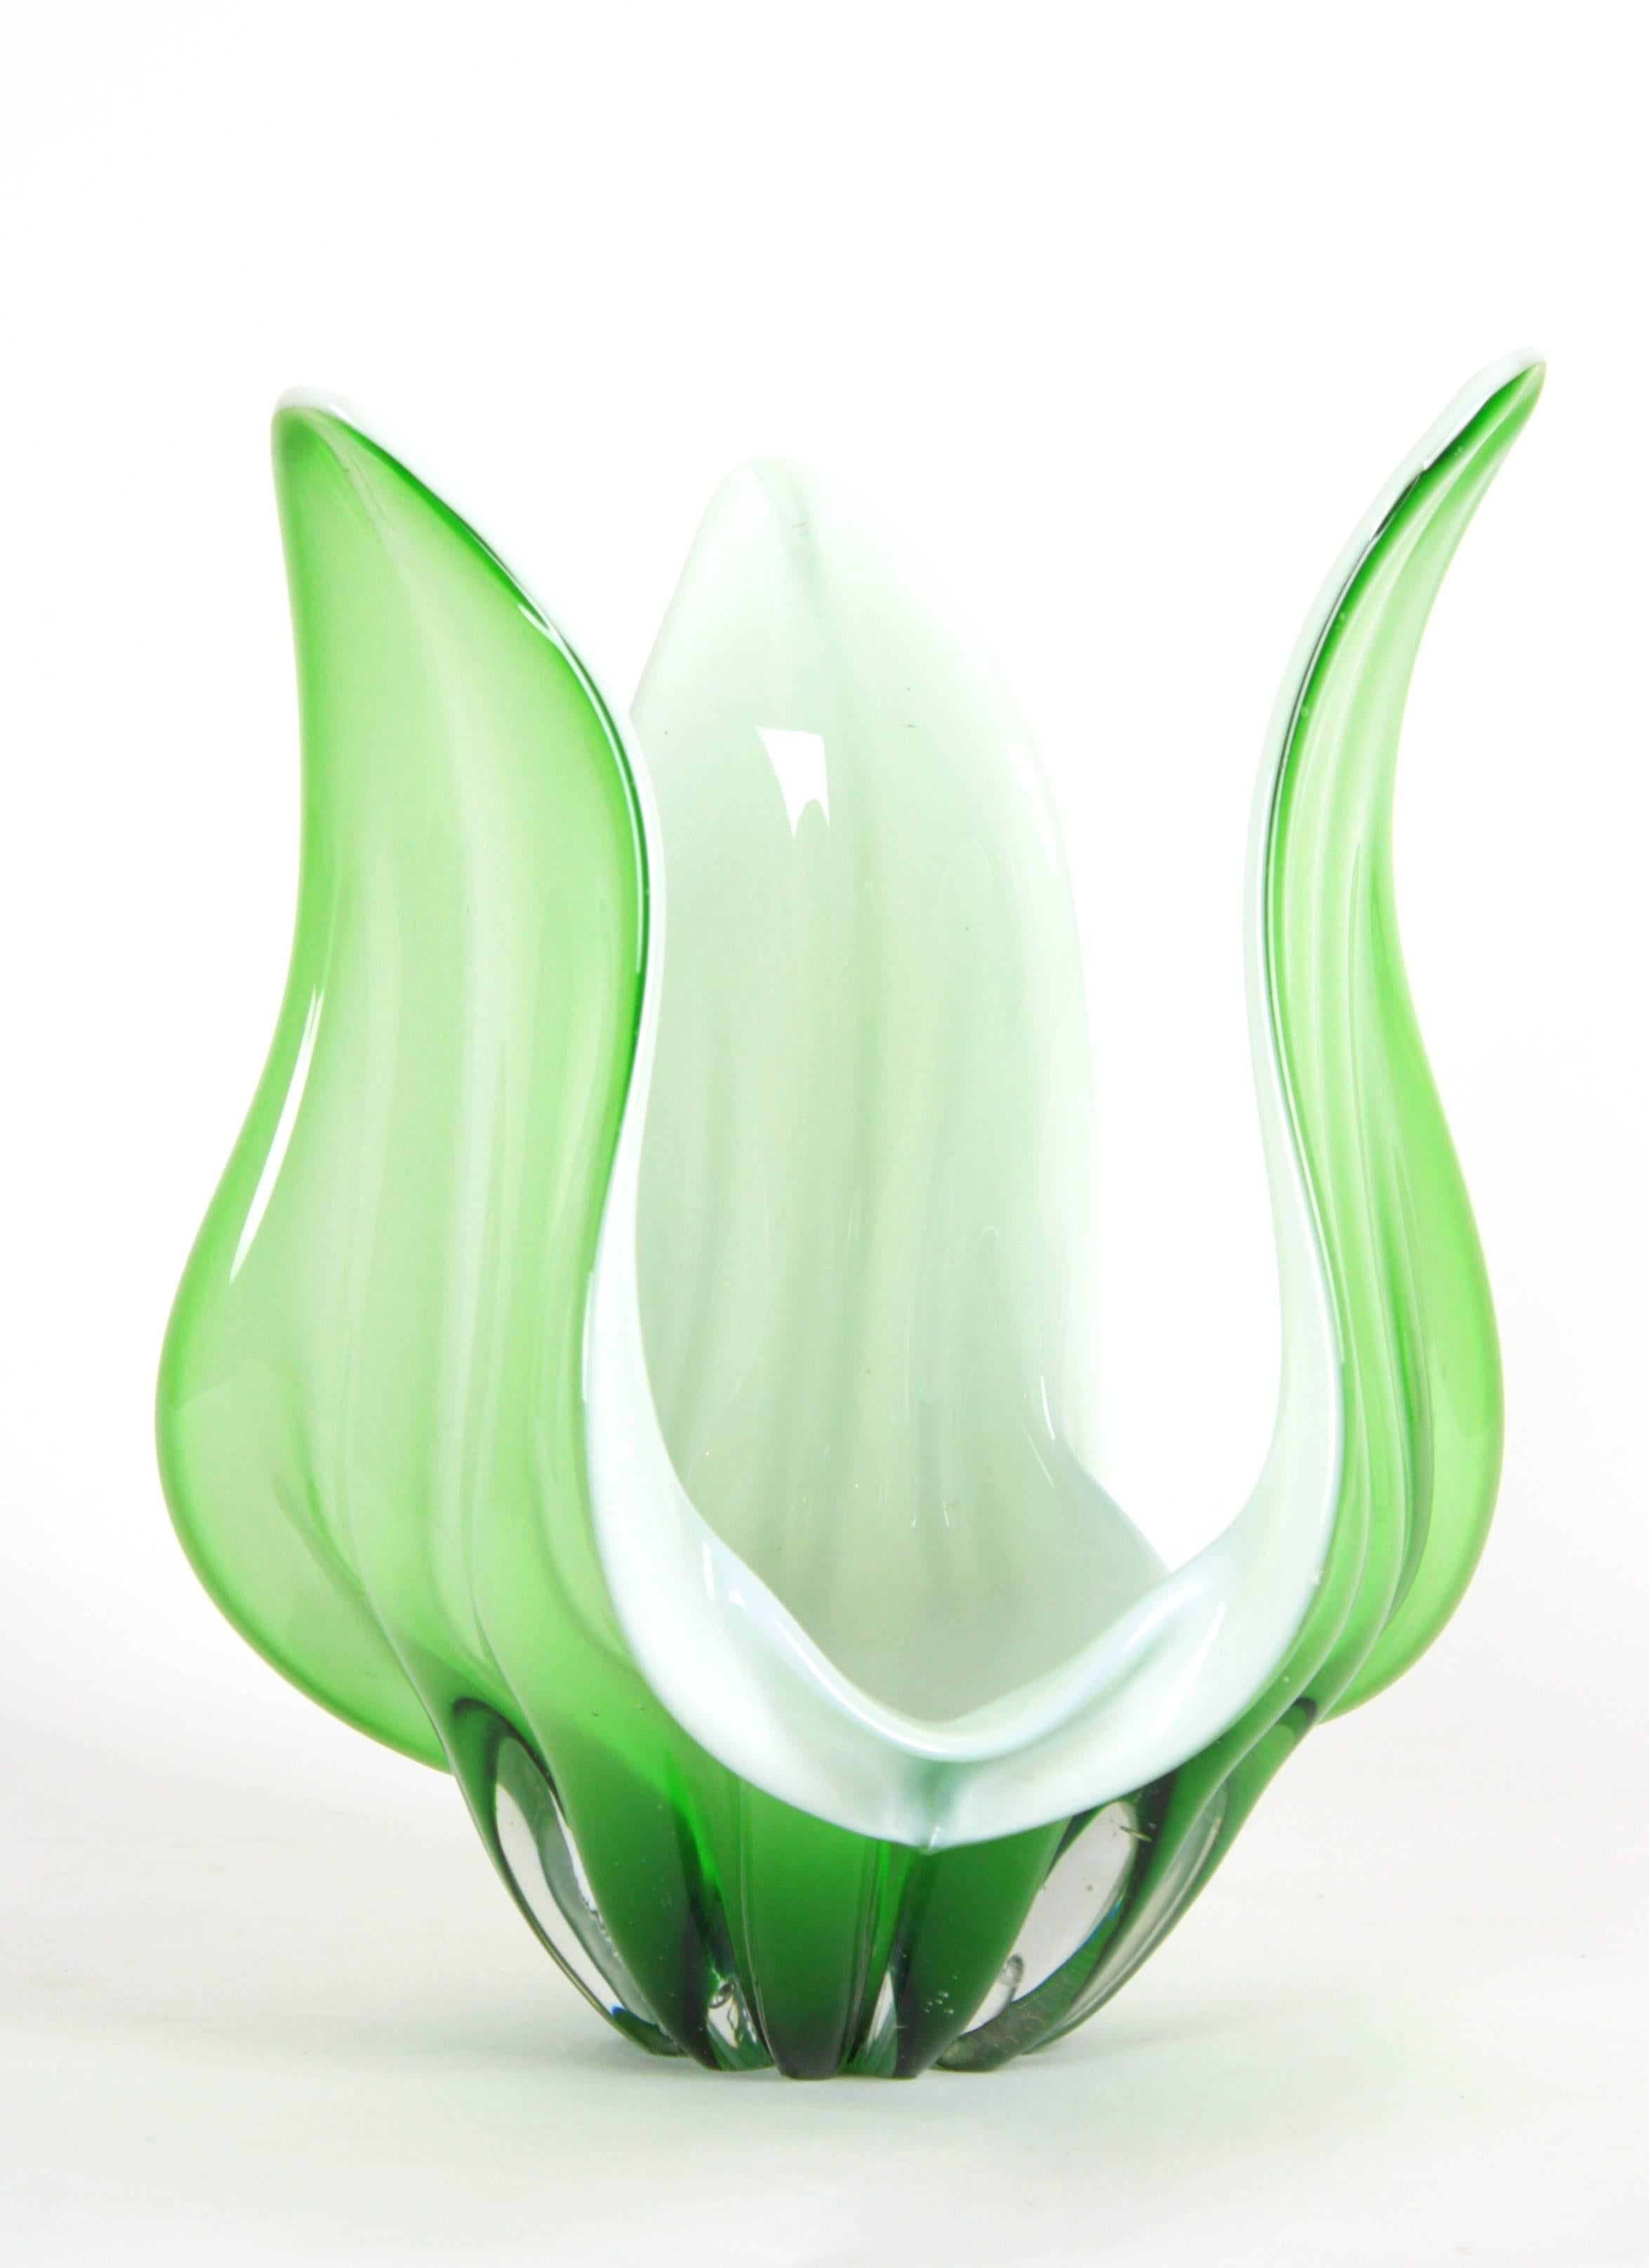 Gorgeous Murano art glass vase or centerpiece with organic shapes in pastel green clear glass and white opaline glass,
handblown glass, Italy, circa 1960.

The vase has a chip under one of its leaves, but only seen if you turn it. Not seen at